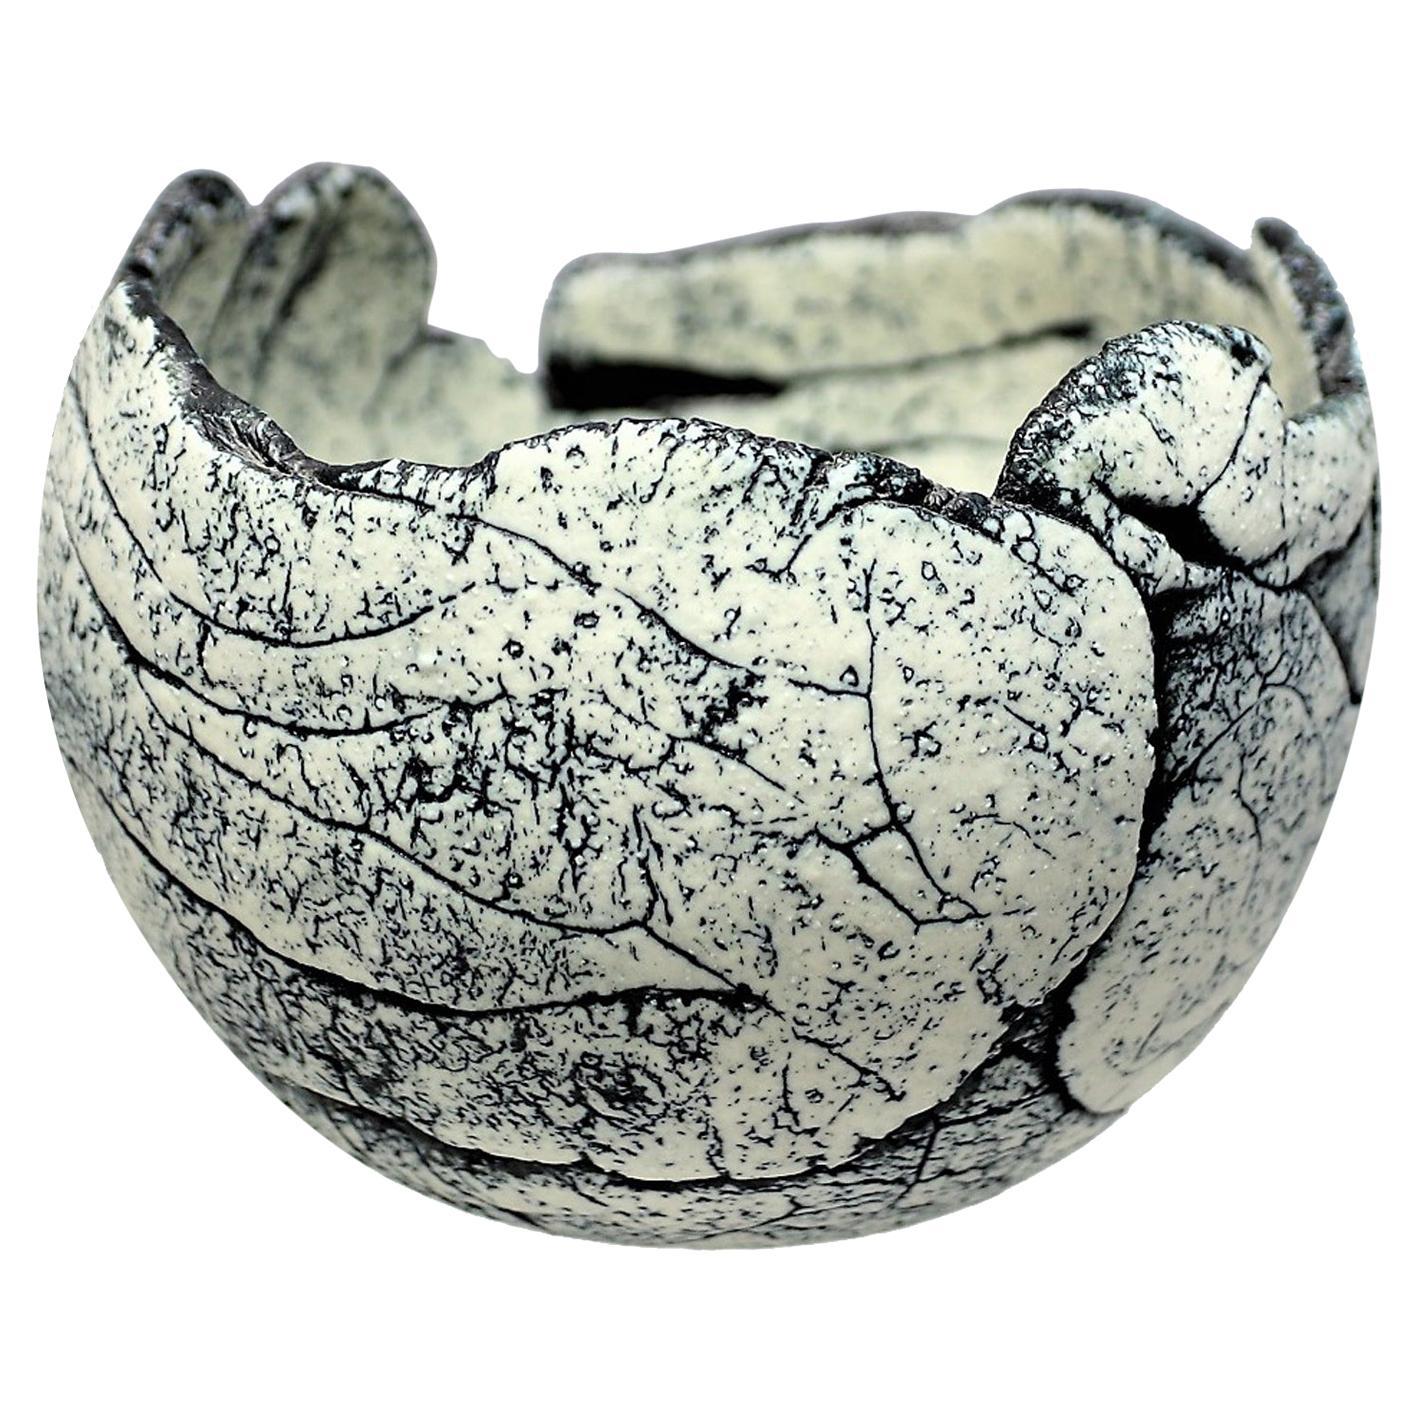 Scandinavian Modern Brutalist Bowl by Artist Ulla Viotti Made of White Clay For Sale